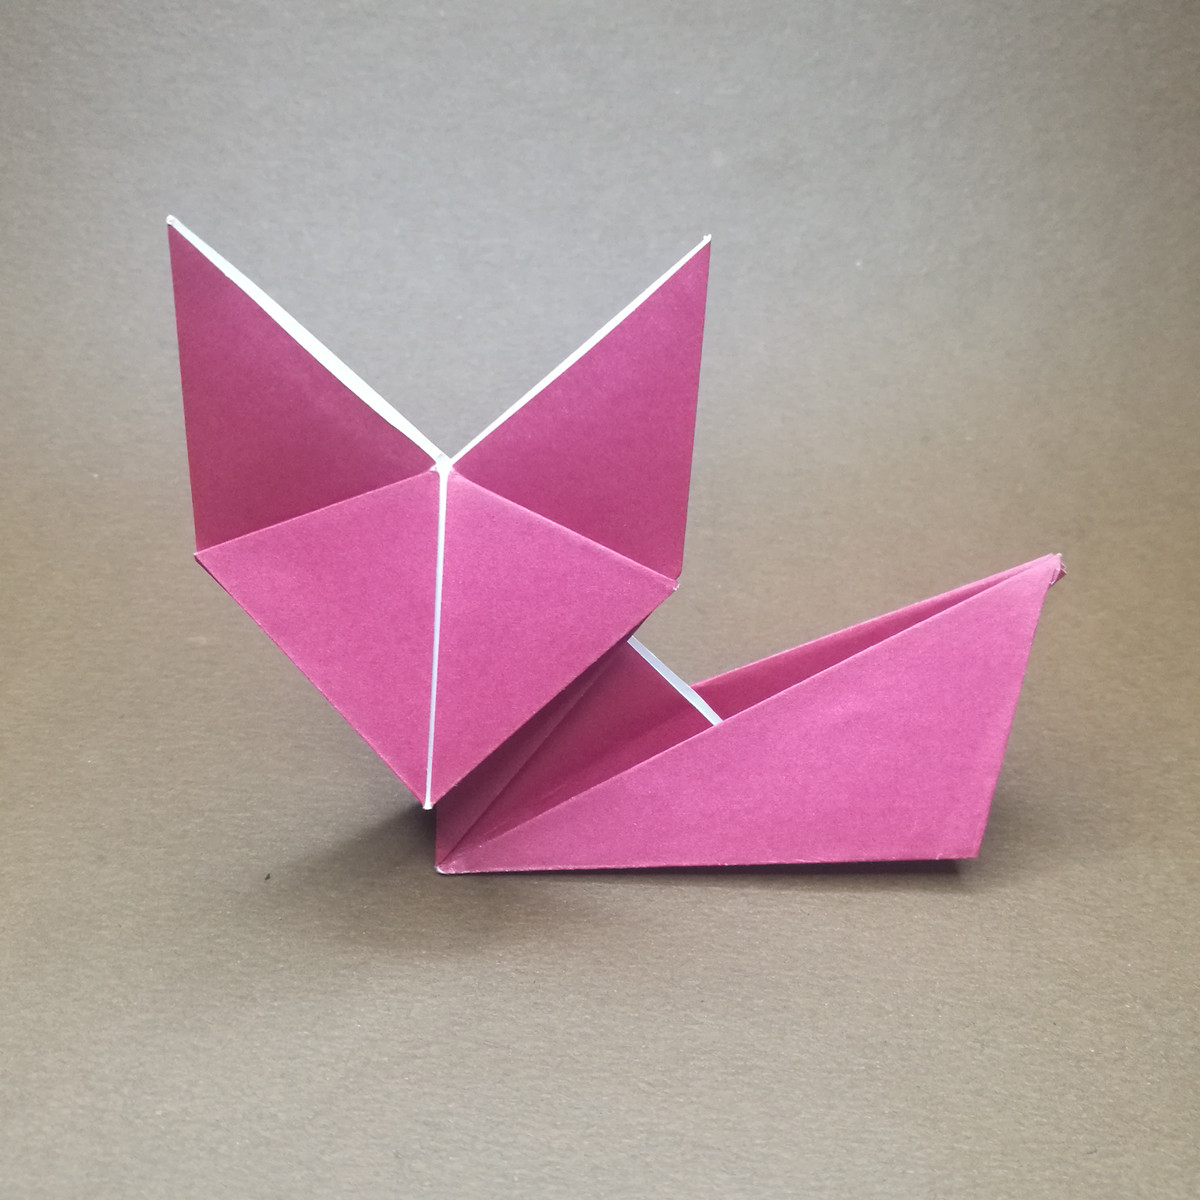 How To Make A Fox Origami Easy Cute Origami Fox Instructions And Diagram